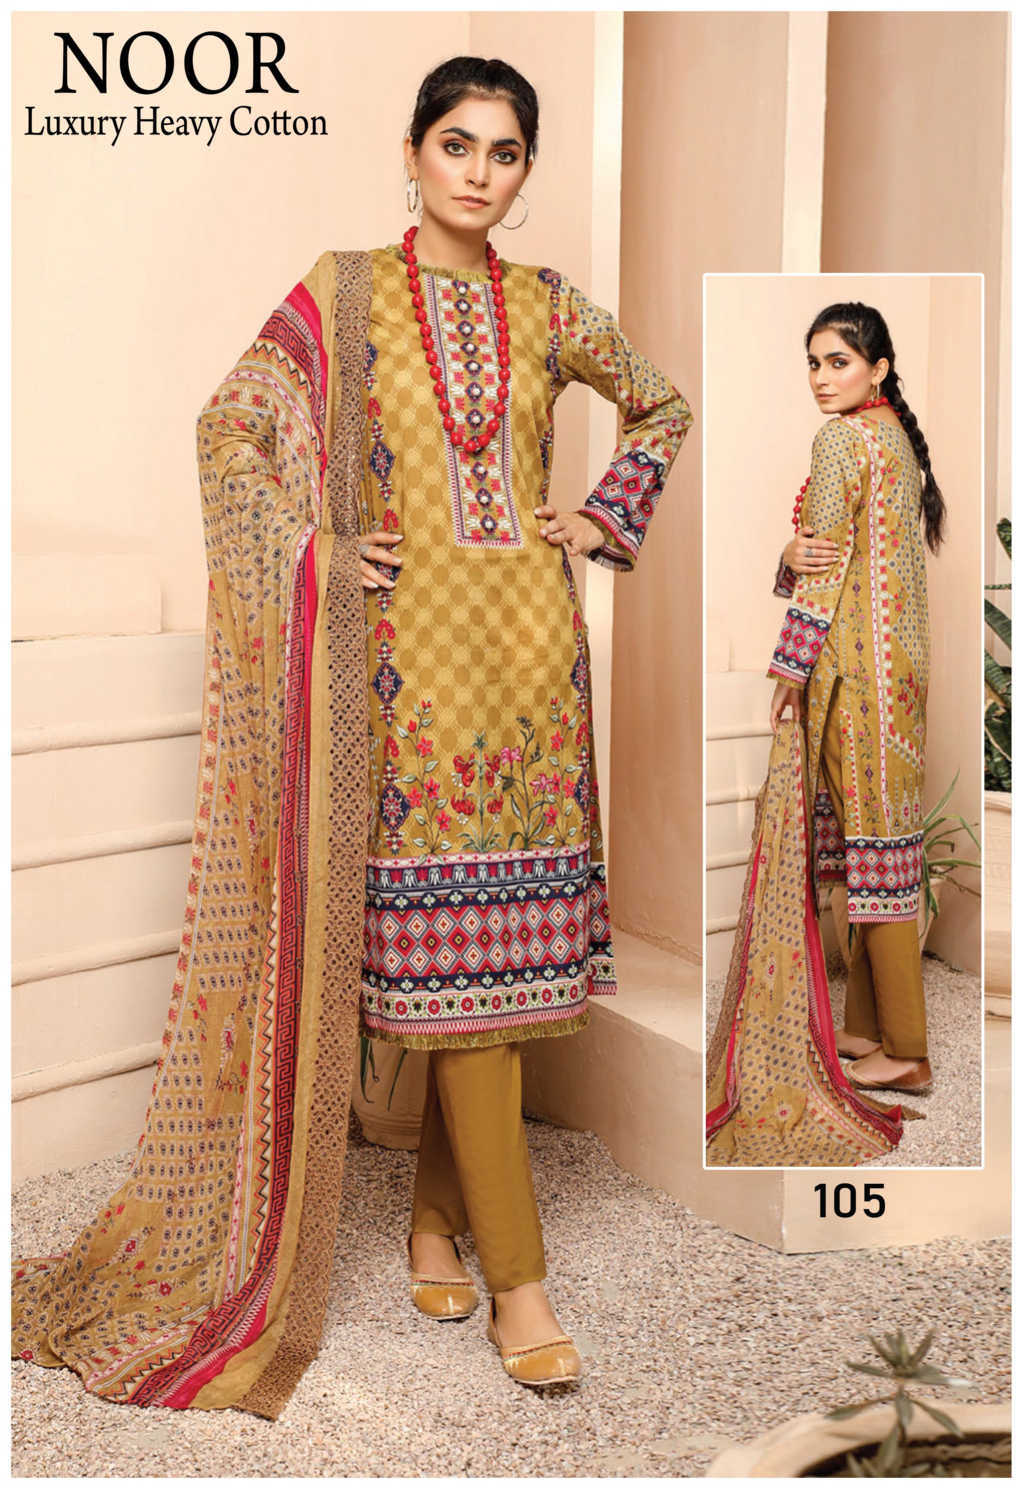 Wholesale: Readymade suits & Readymade ladies dress for Market shop